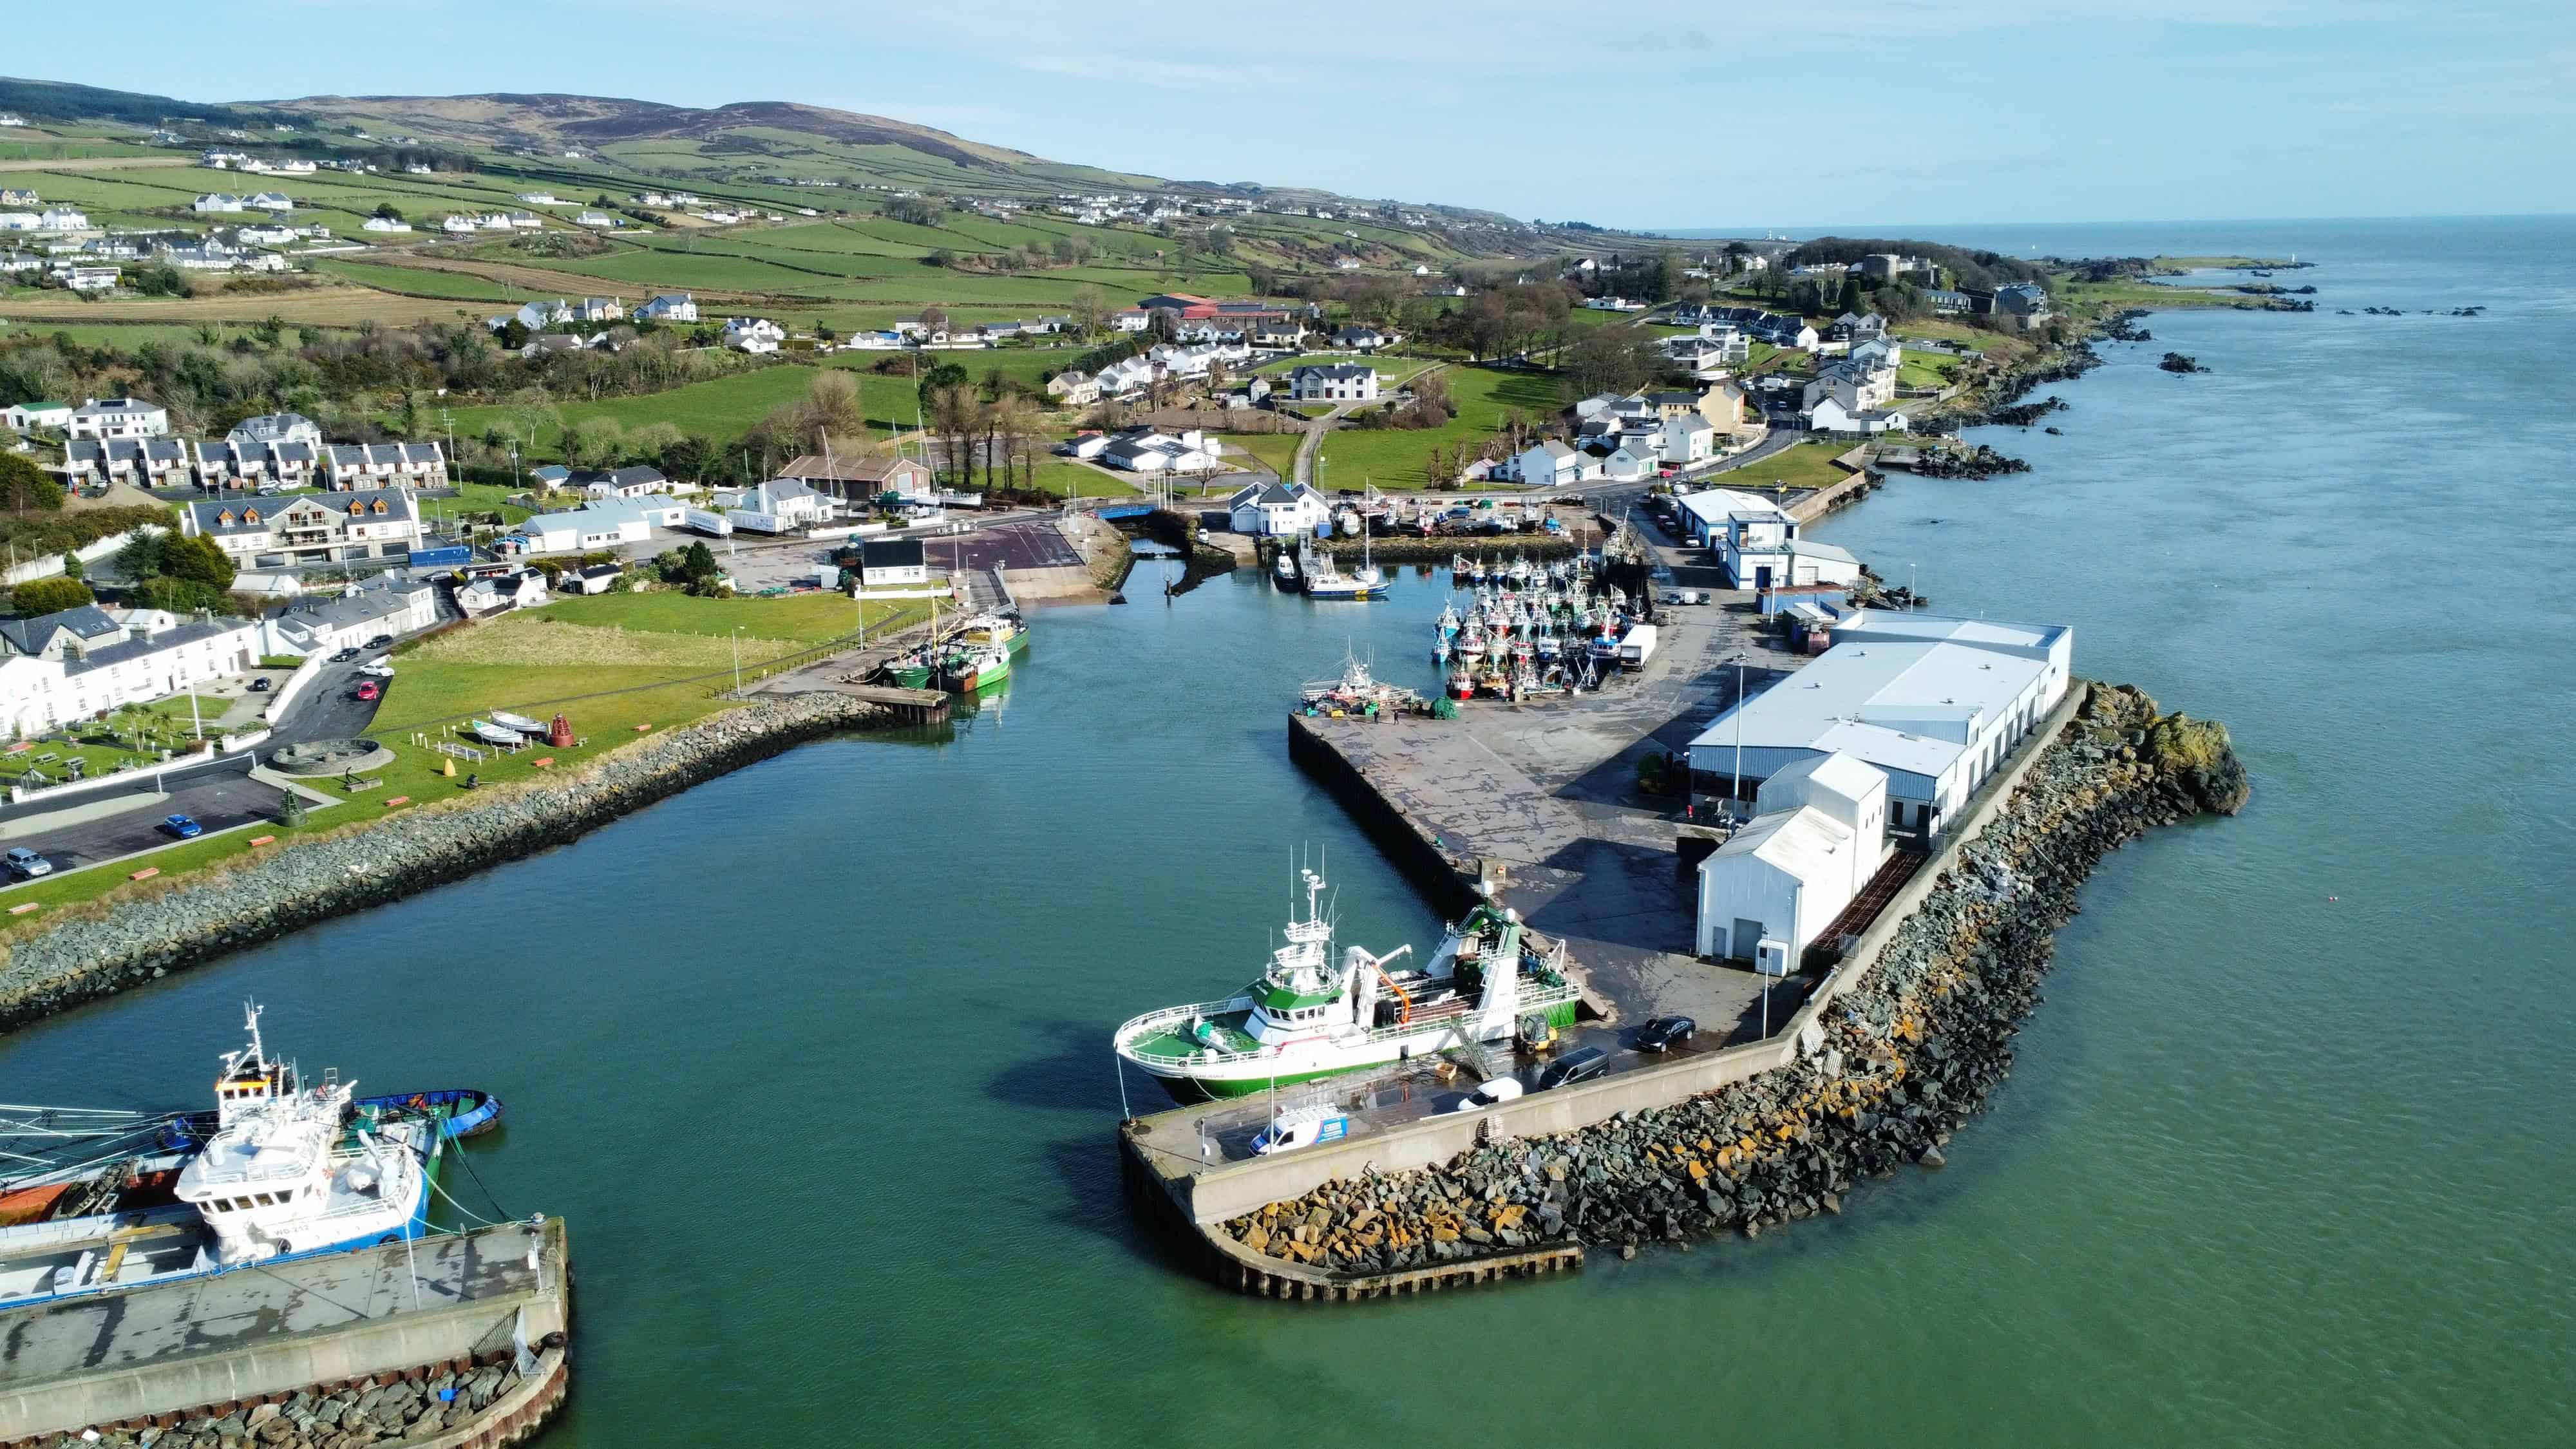 The bird's eye view of Greencastle Harbor with moored boats. Donegal, Ireland.